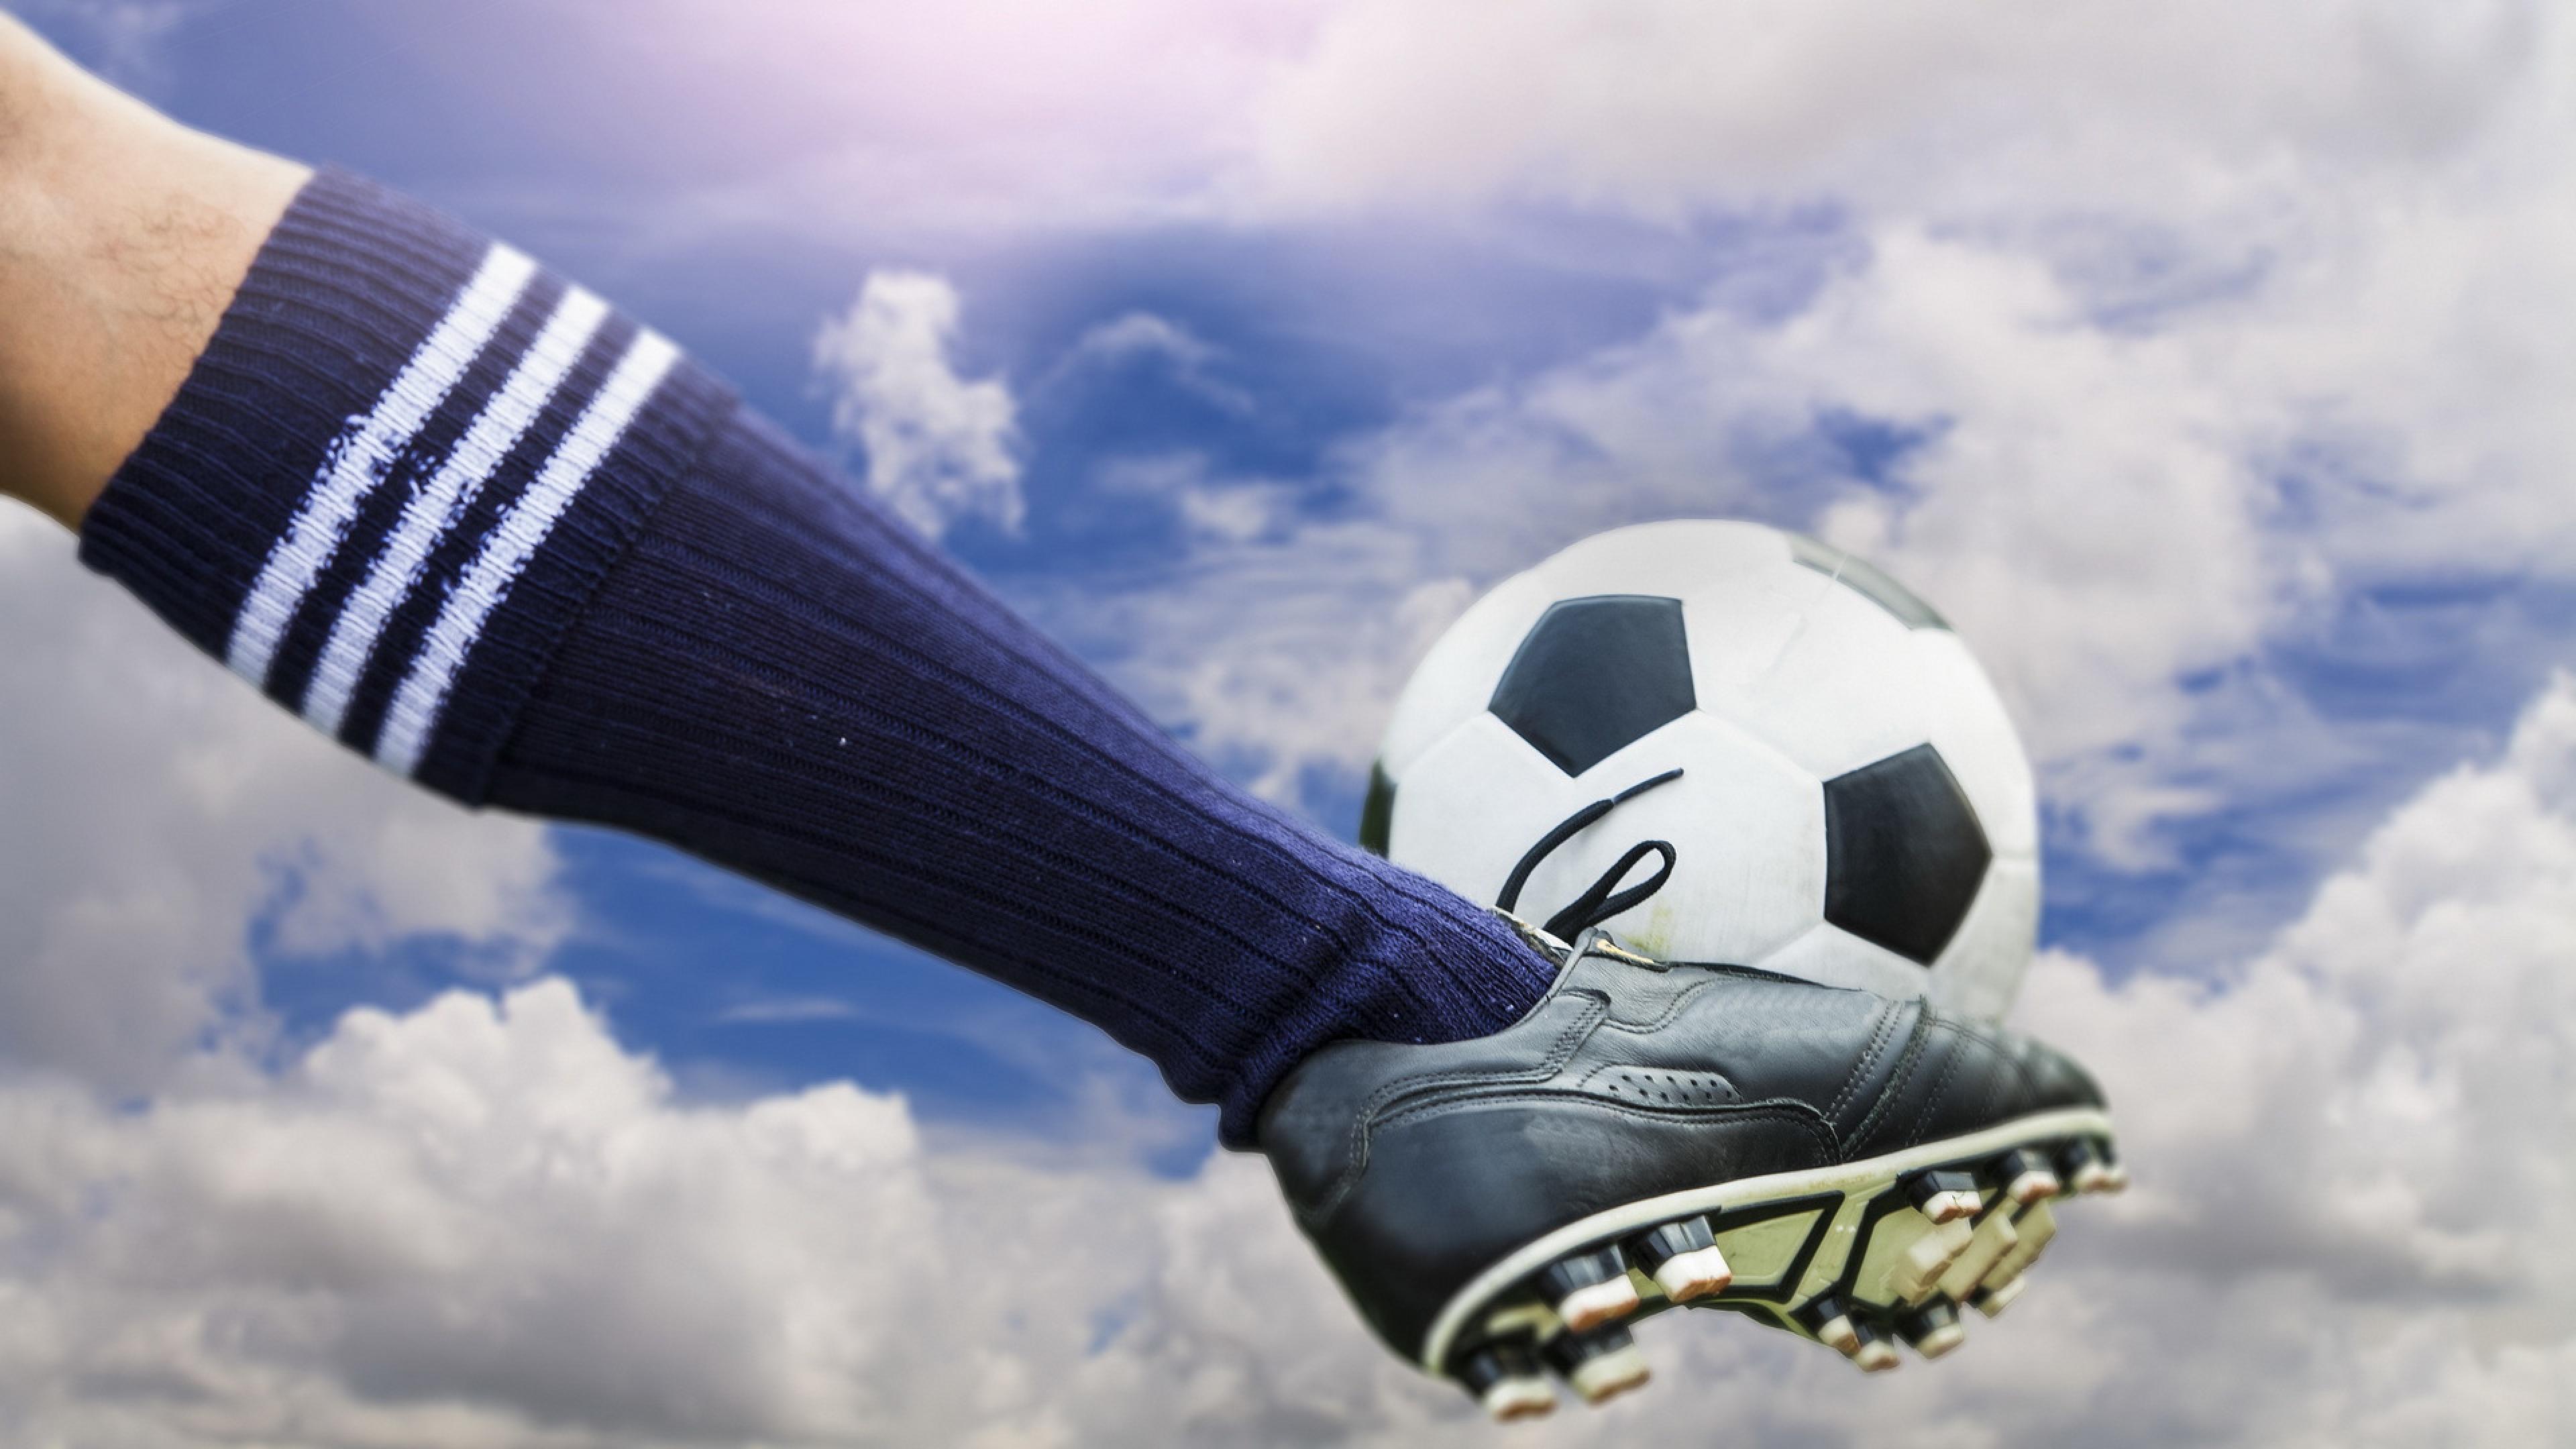 Football Boots Stockings, HD Sports, 4k Wallpapers, Images ...